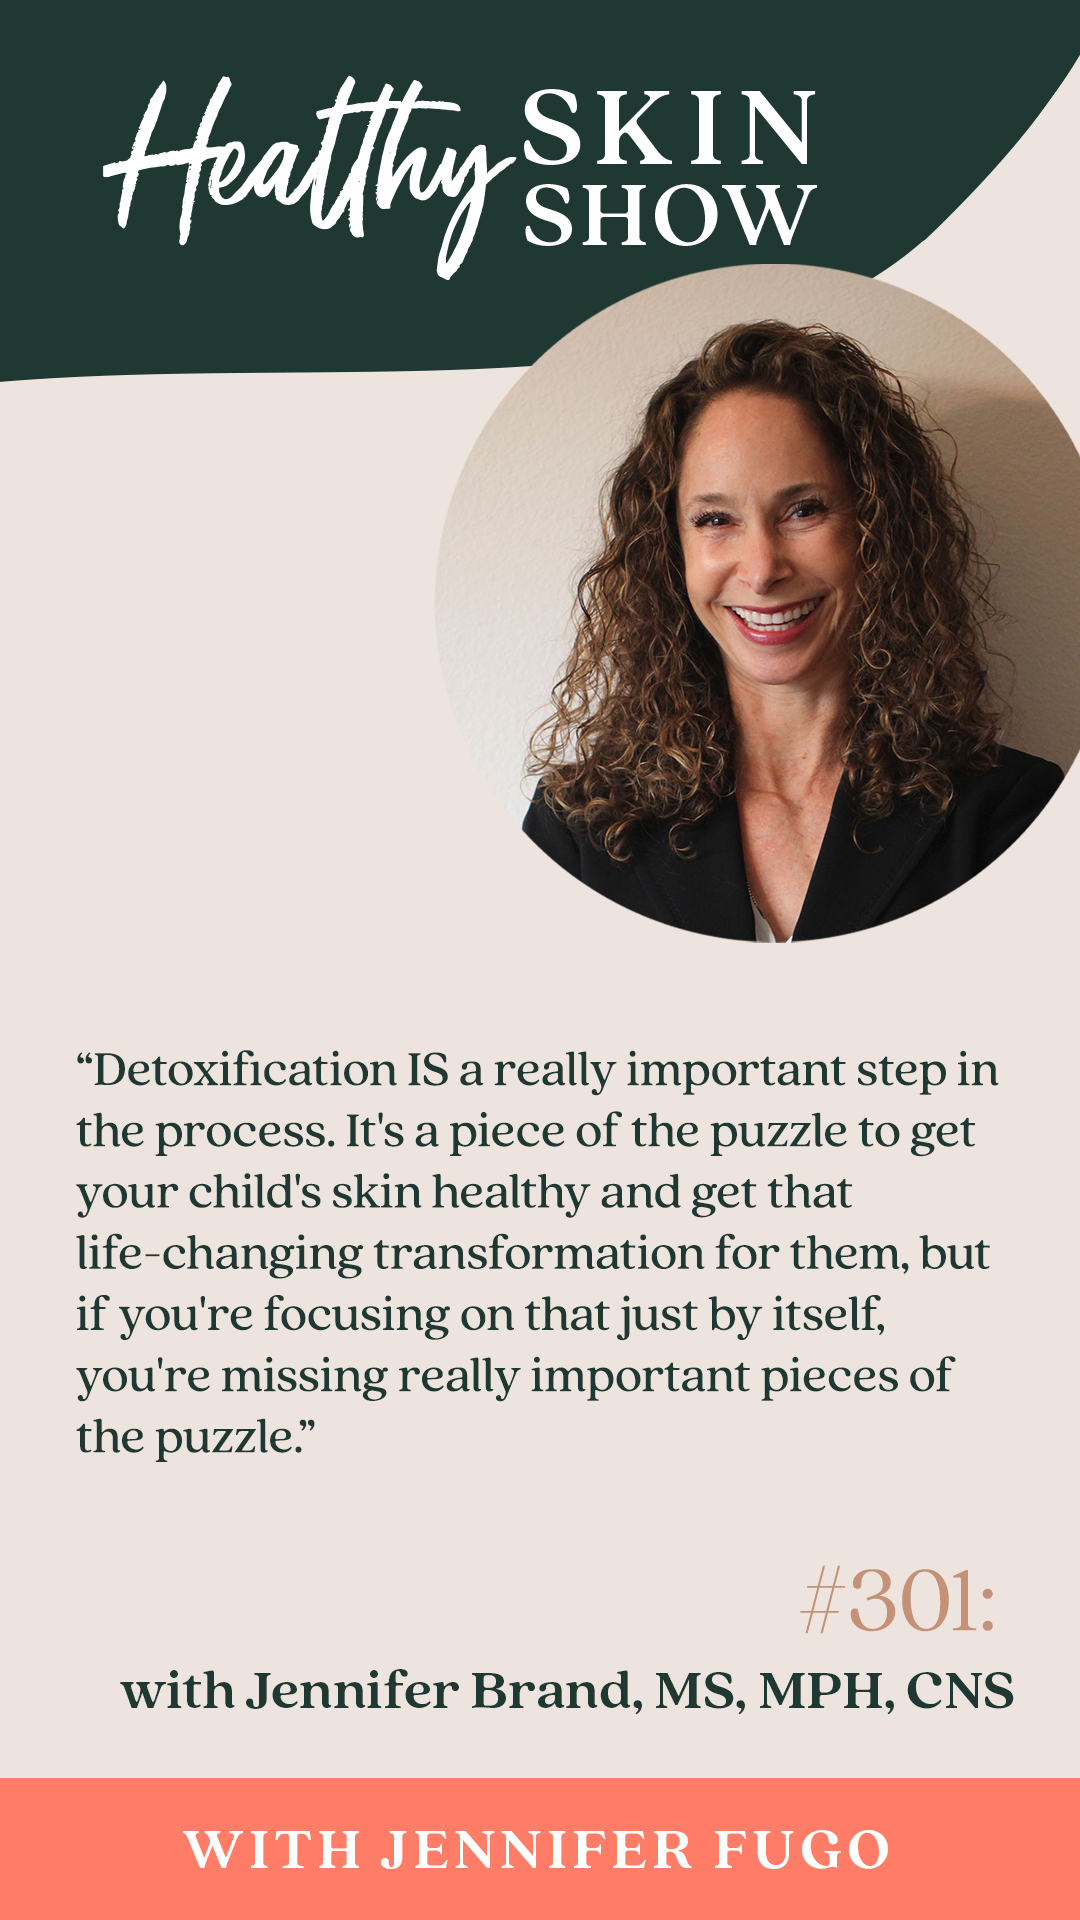 "Detoxification IS a really important step in the process. It's a piece of the puzzle to get your child's skin healthy and get that life-changing transformation for them, but if you're focusing on that just by itself, you're missing really important pieces of the puzzle."